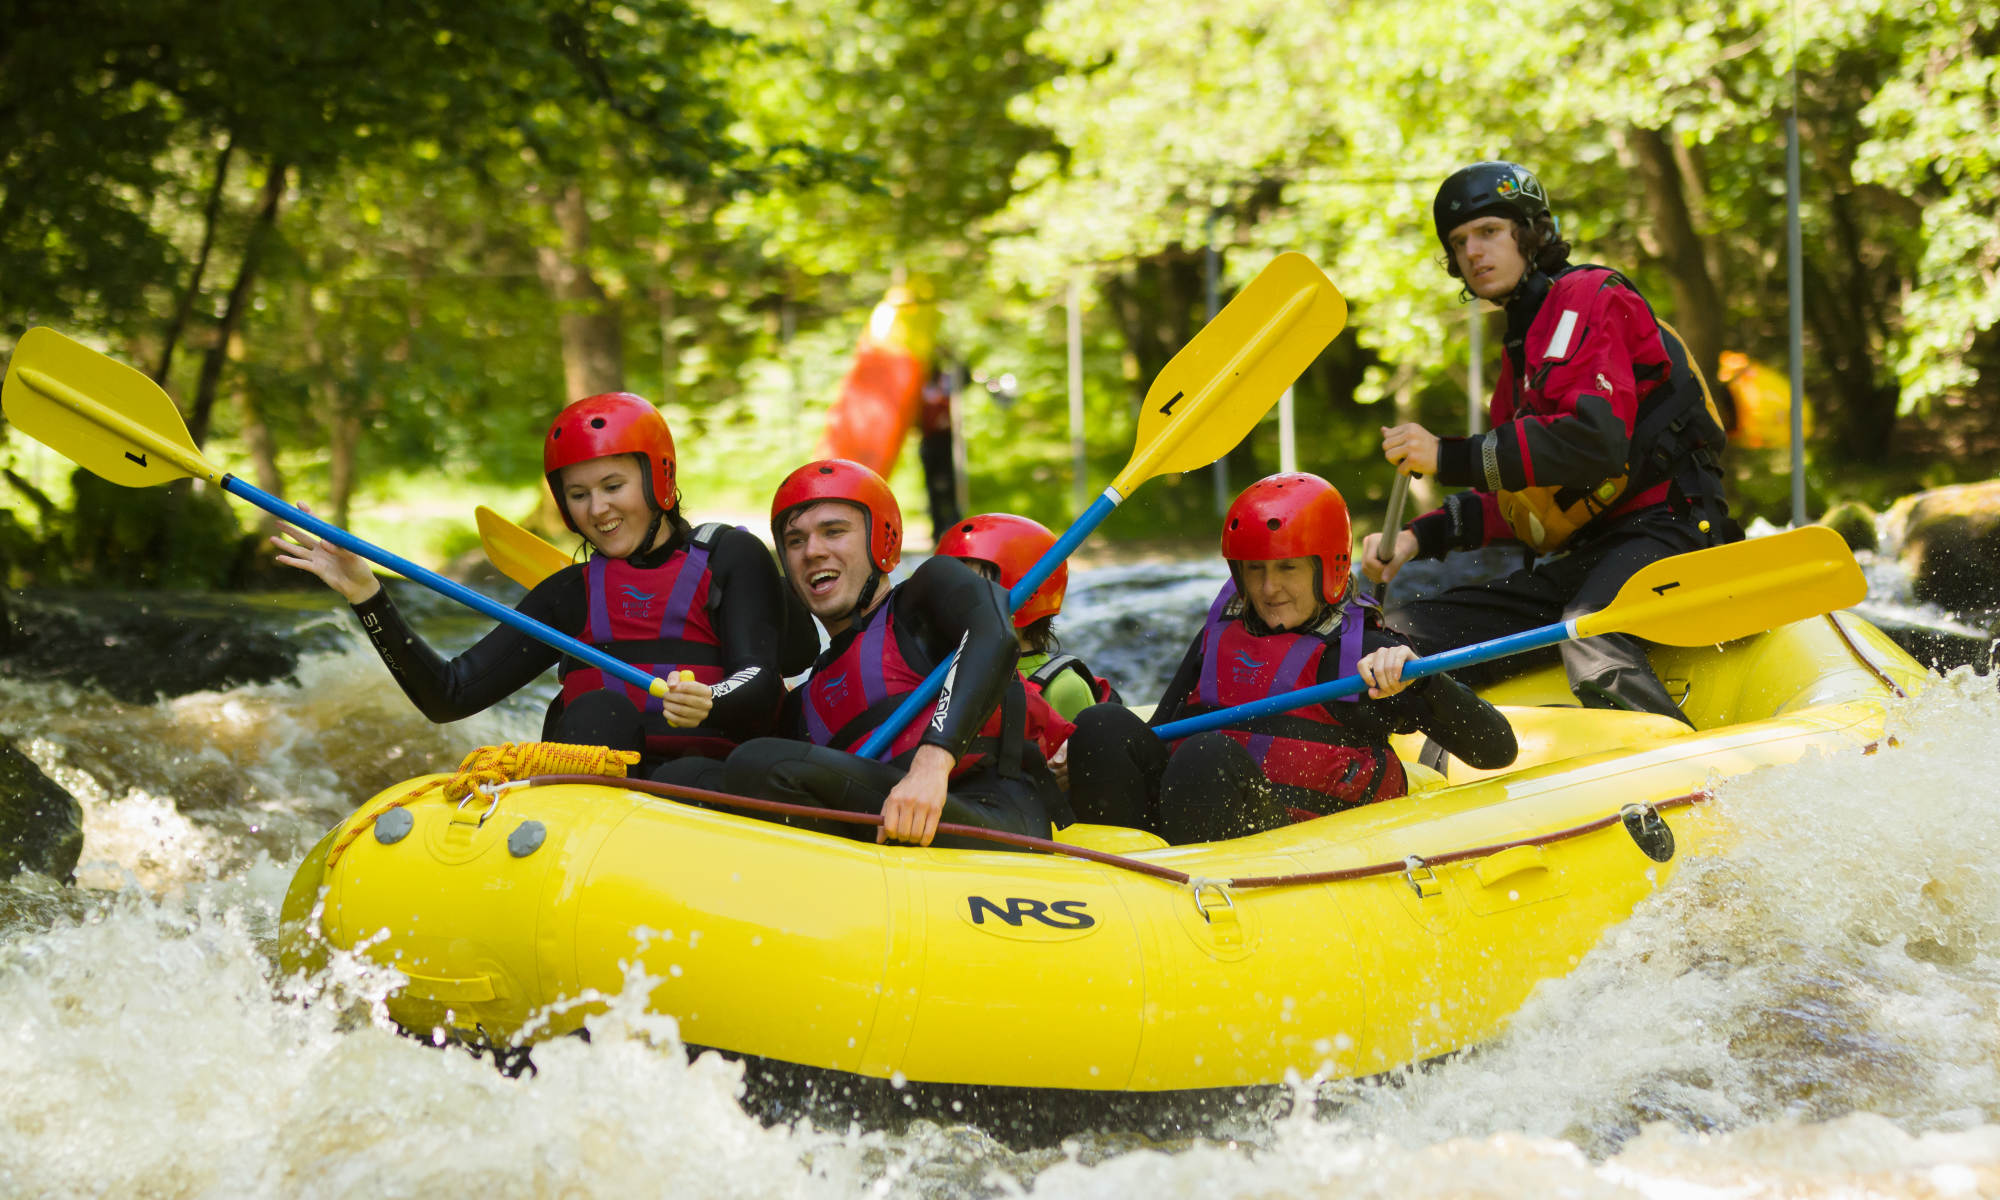 A group of people rafting on the River Tryweryn in North Wales.